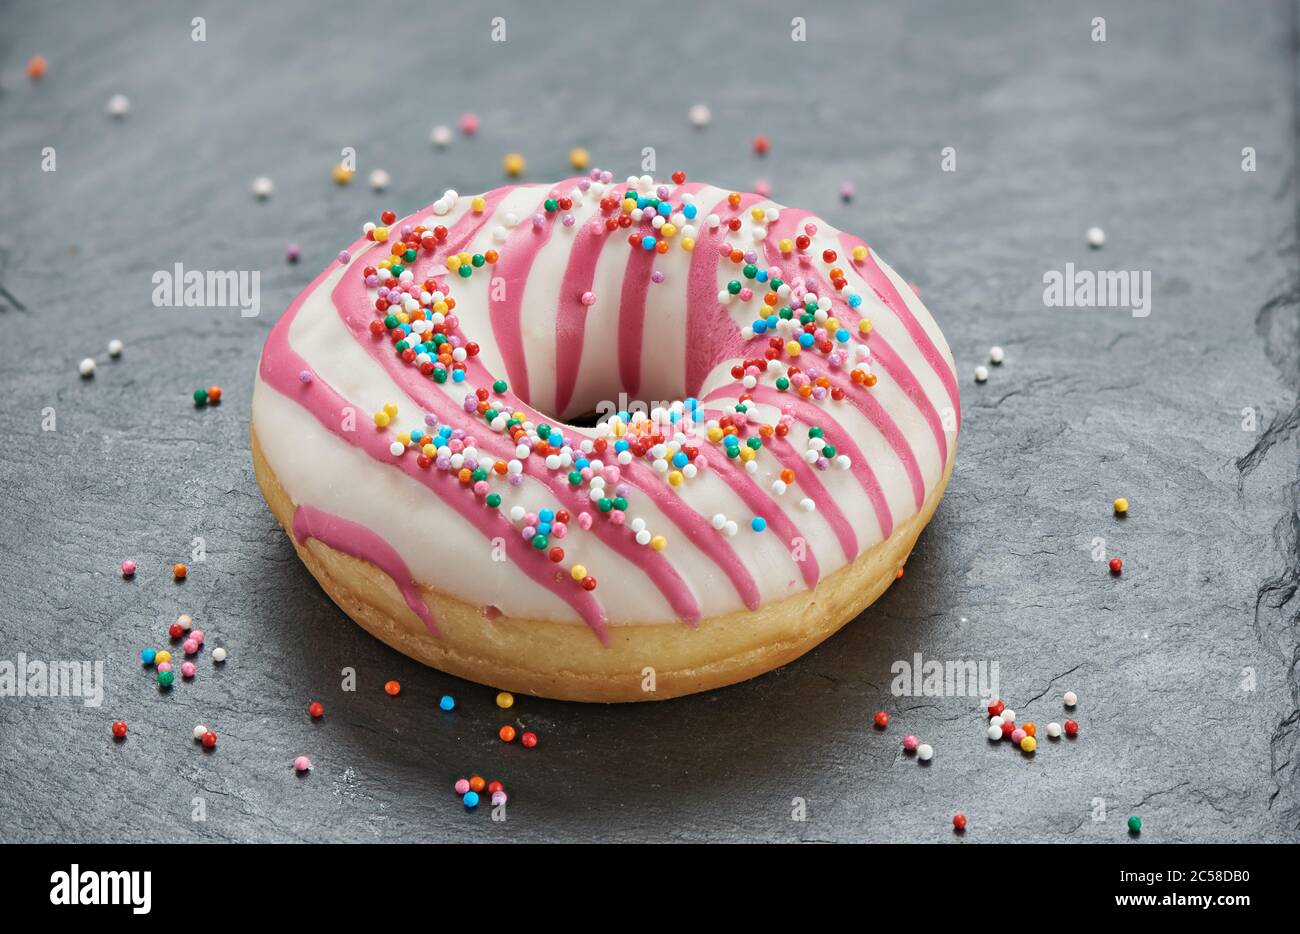 glazed round donut with sprinkles on a stone table Stock Photo